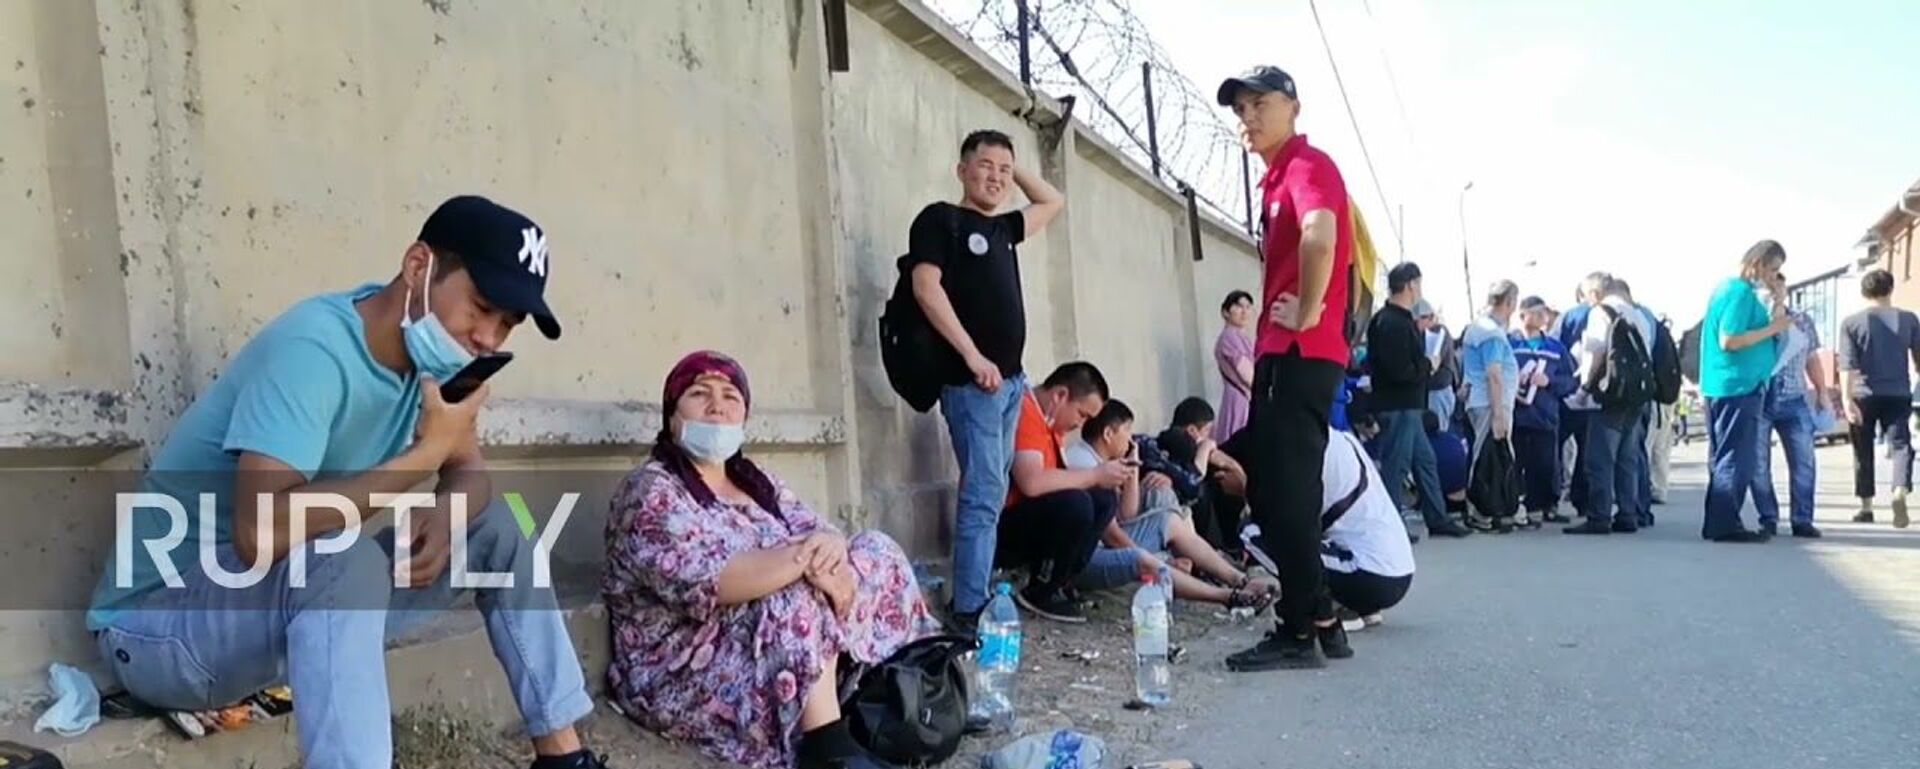 Russia: Migrant workers queue for COVID jabs in Moscow - Sputnik Молдова, 1920, 08.07.2021